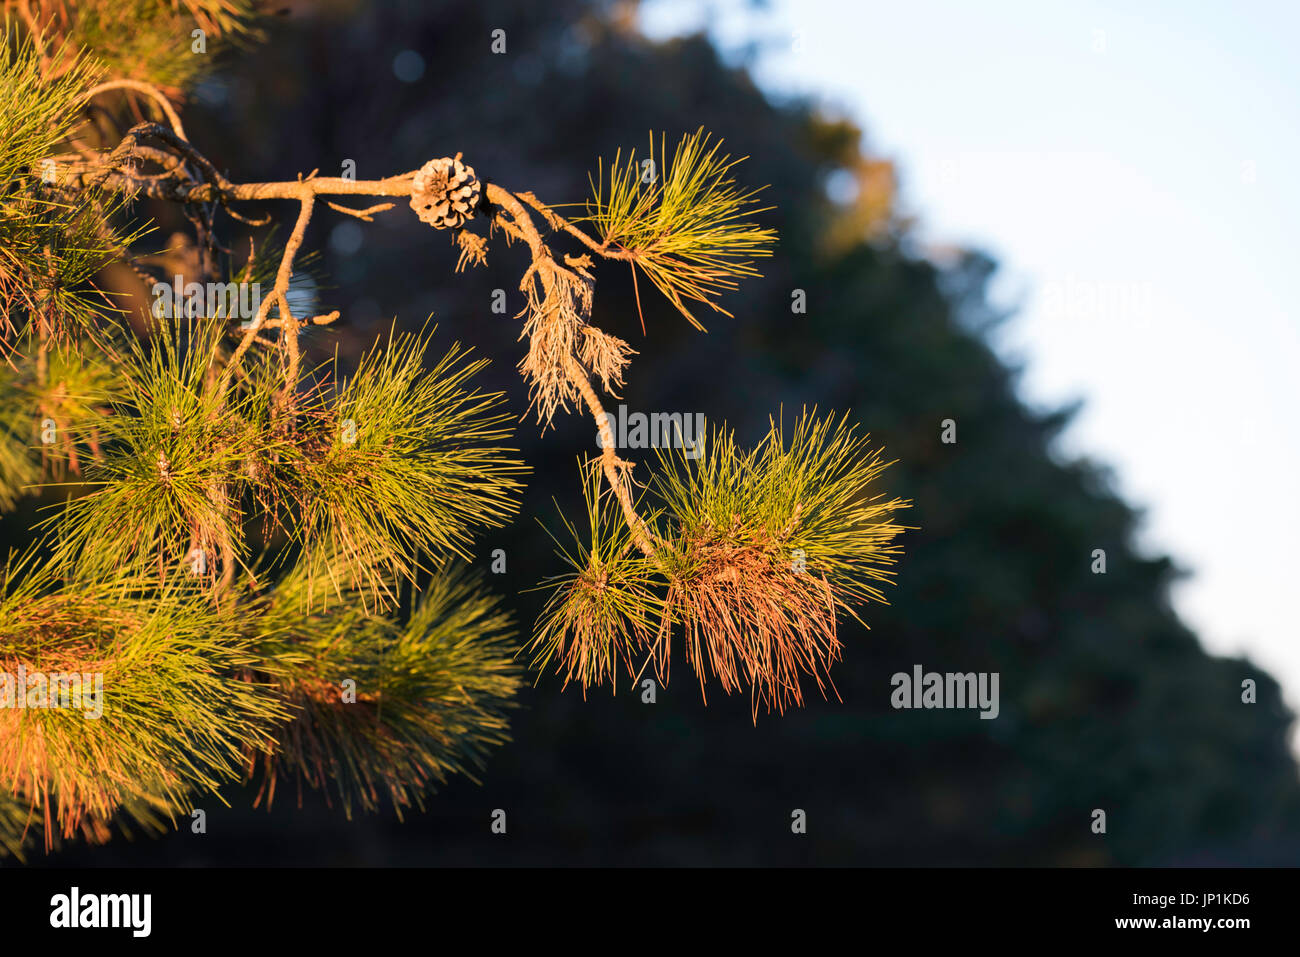 The end of a pine tree branch caught in the late afternoon sun Stock Photo